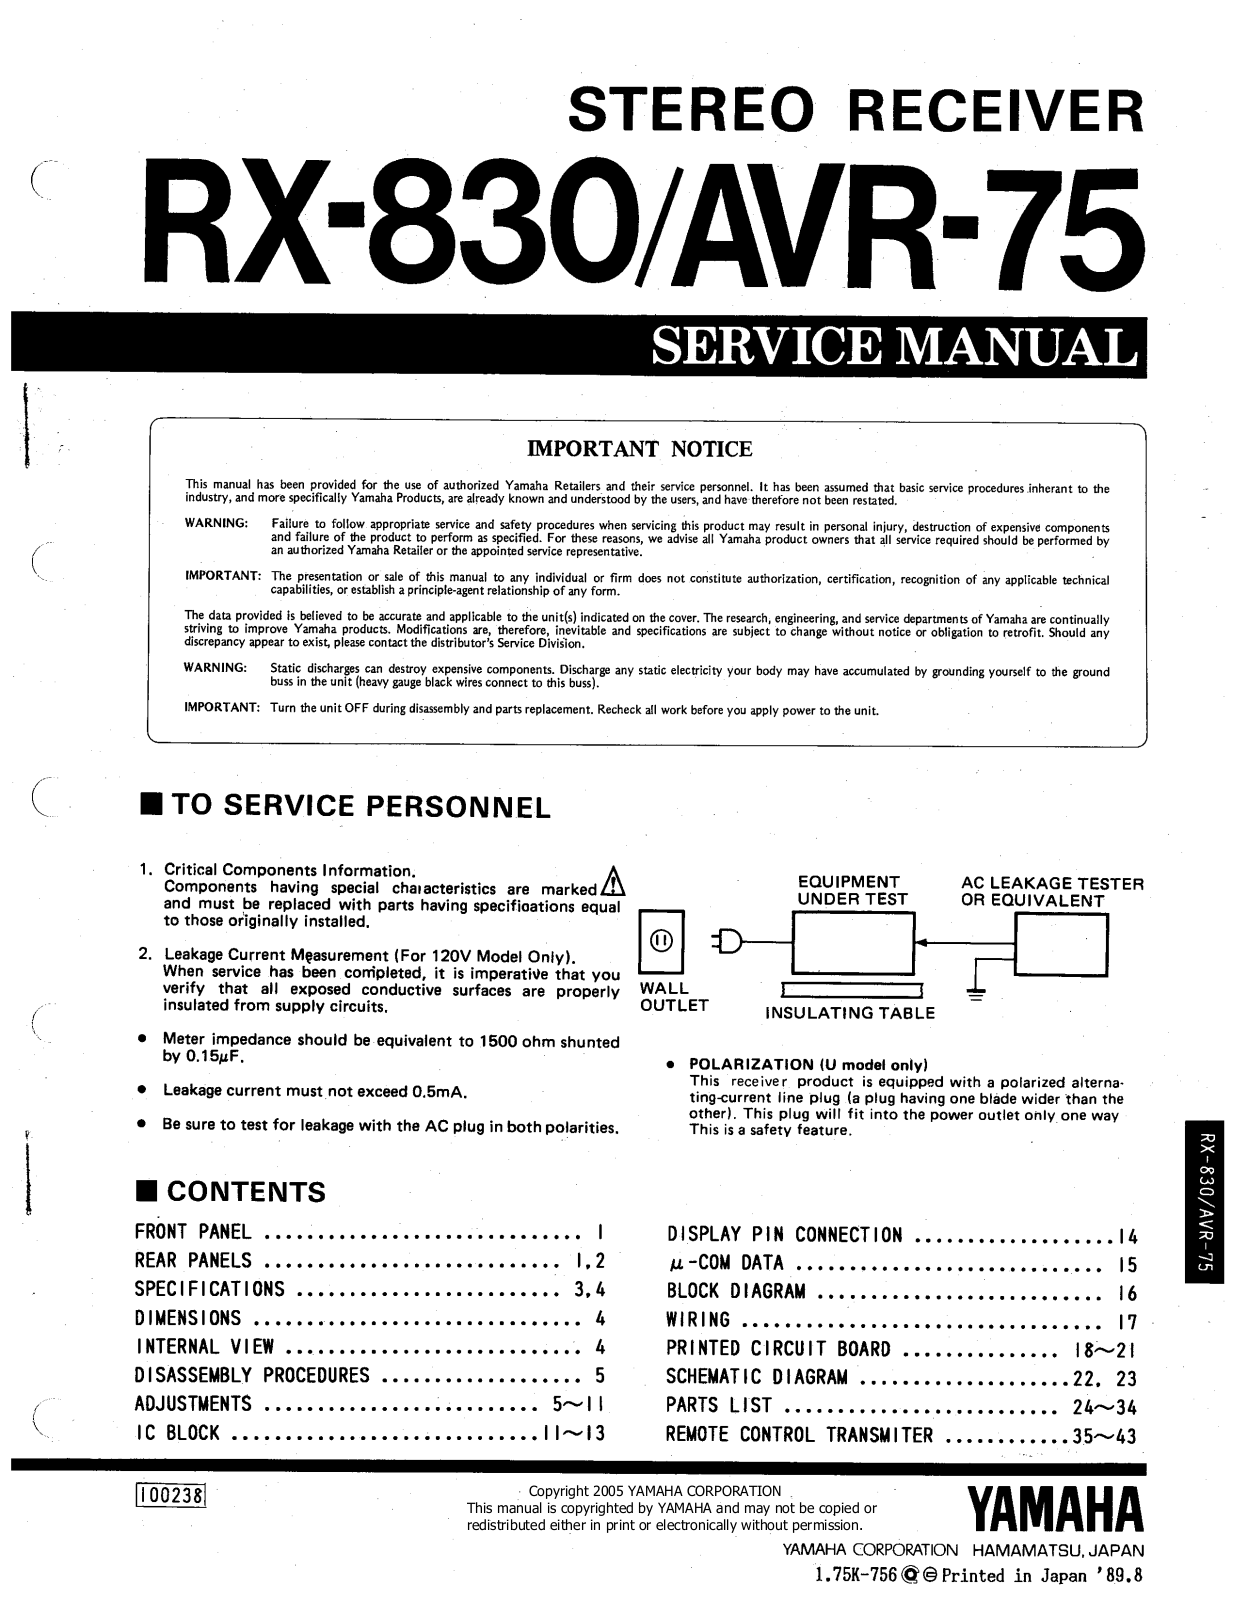 Yamaha AVR-75, RX-830 Owners manual